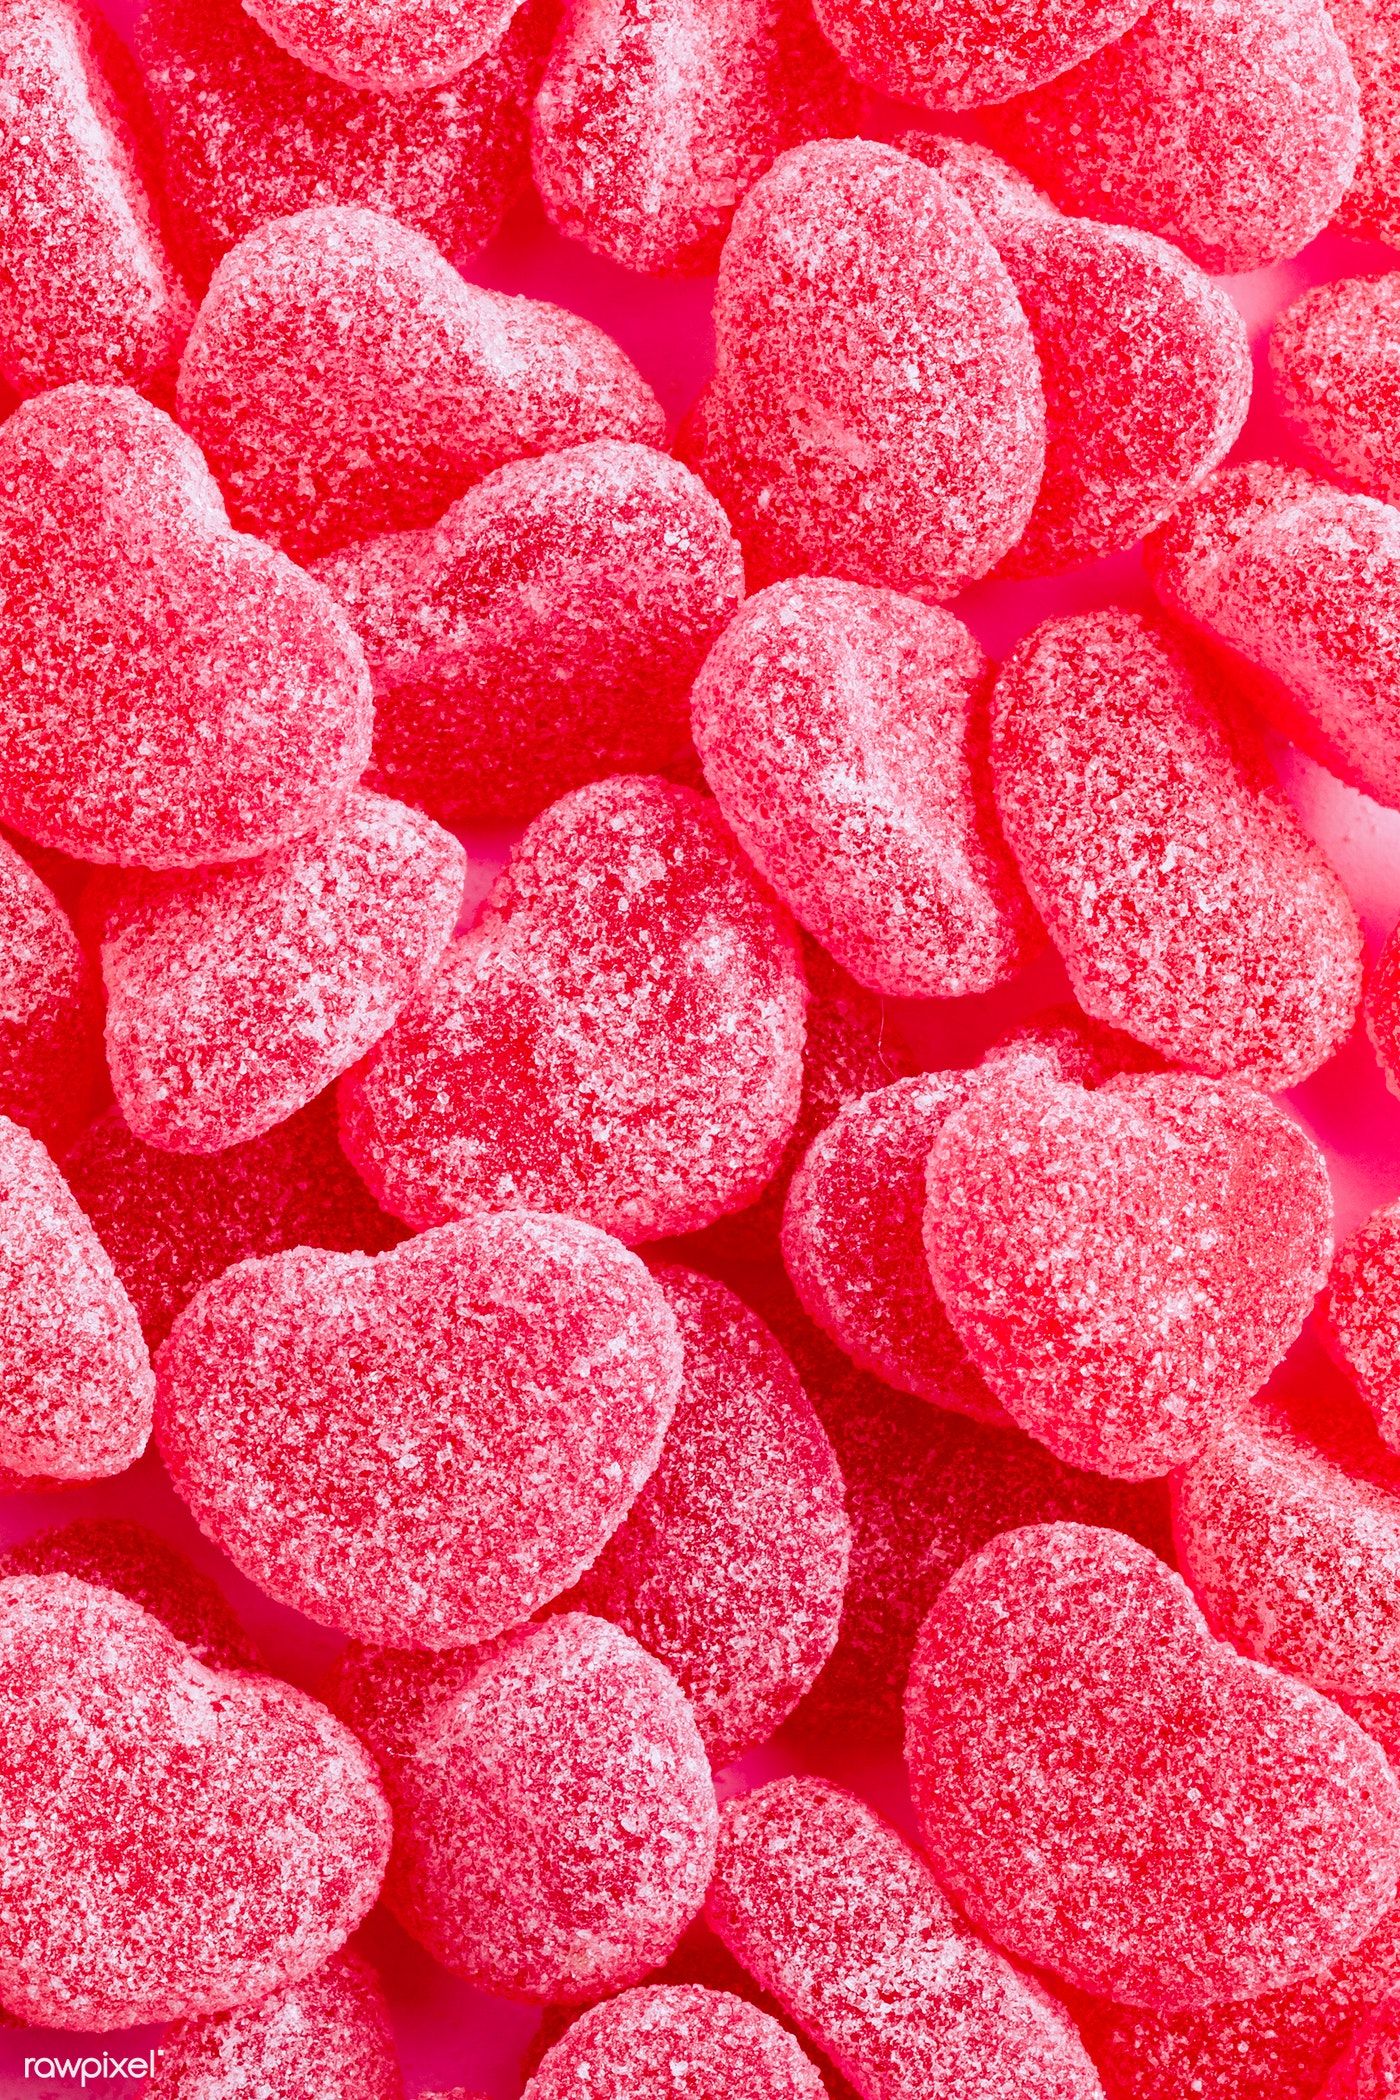 Red sweet candies. premium image / Karolina / Kaboompics. Candy, Candy background, Sweet candy